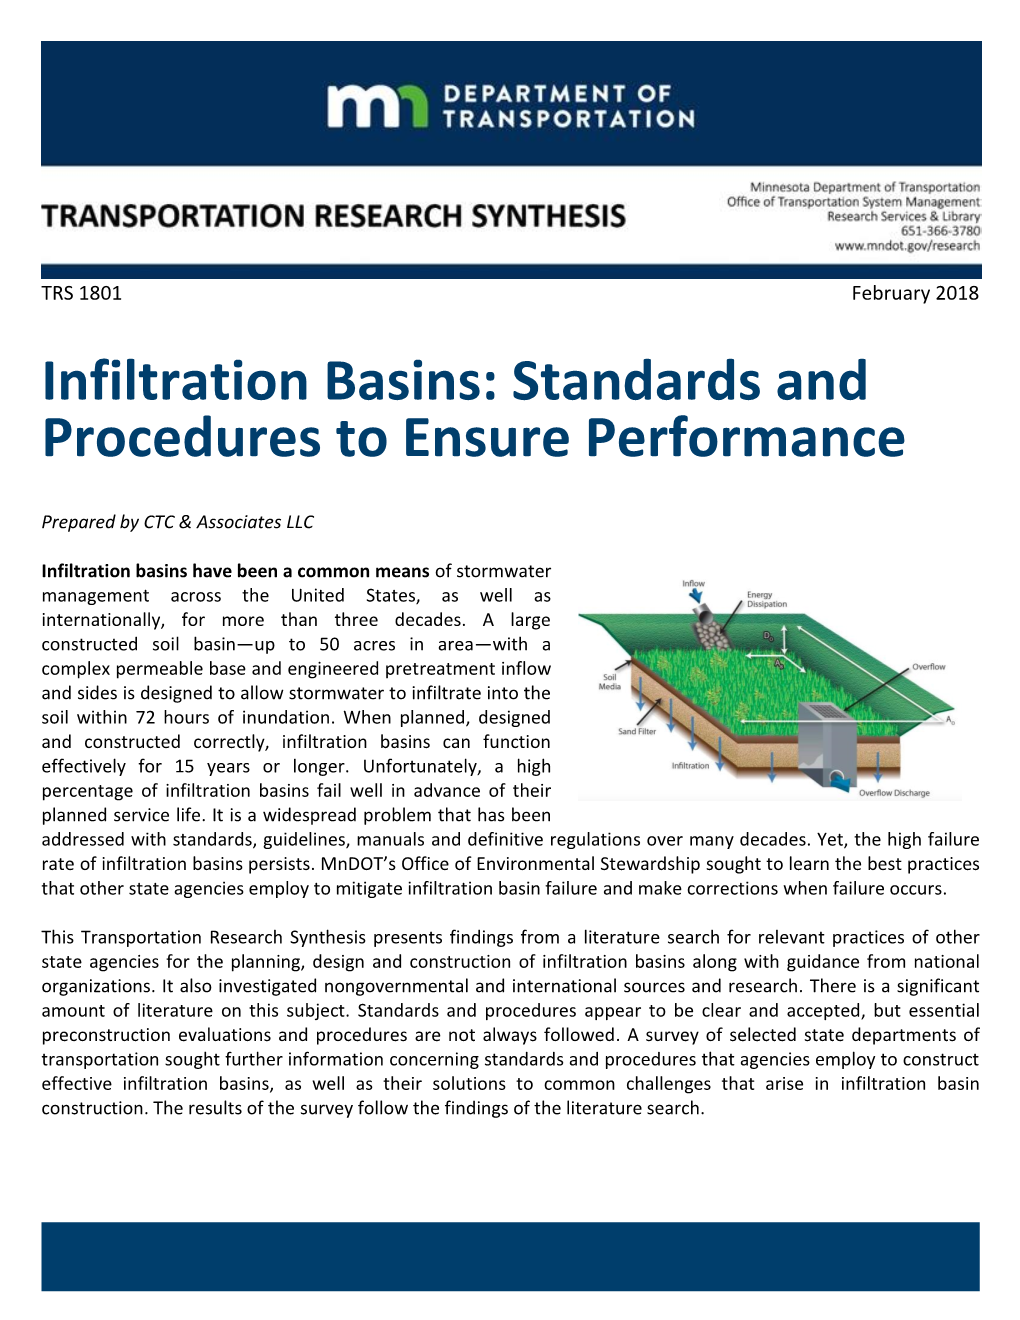 Infiltration Basins: Standards and Procedures to Ensure Performance